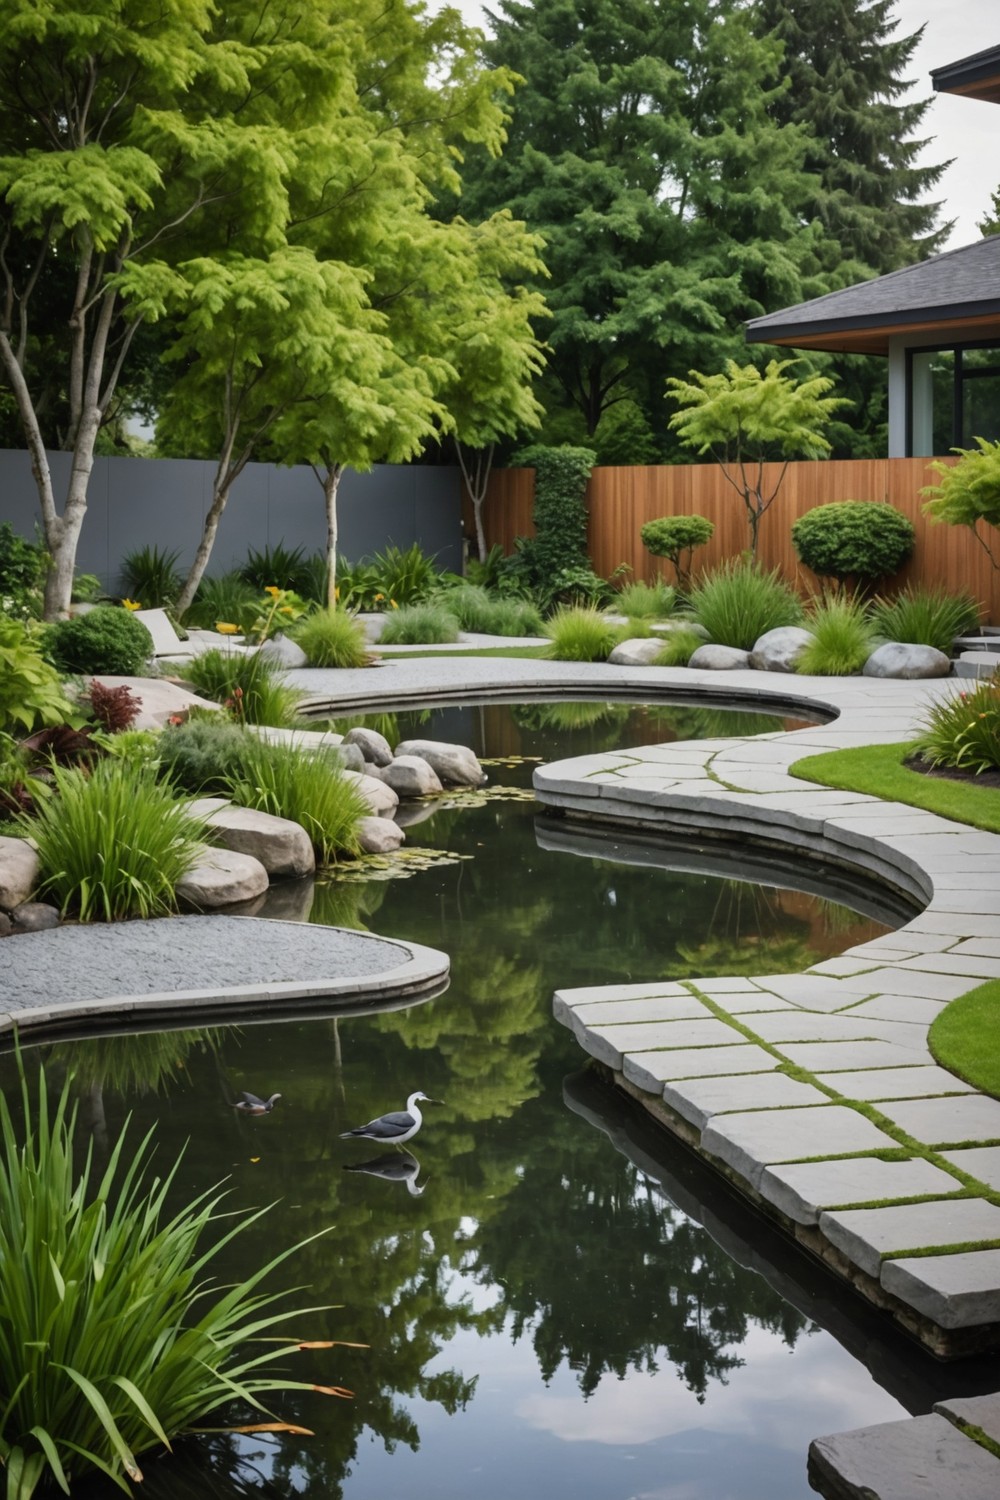 Incorporating a Water Feature, Like a Small Pond or Fountain